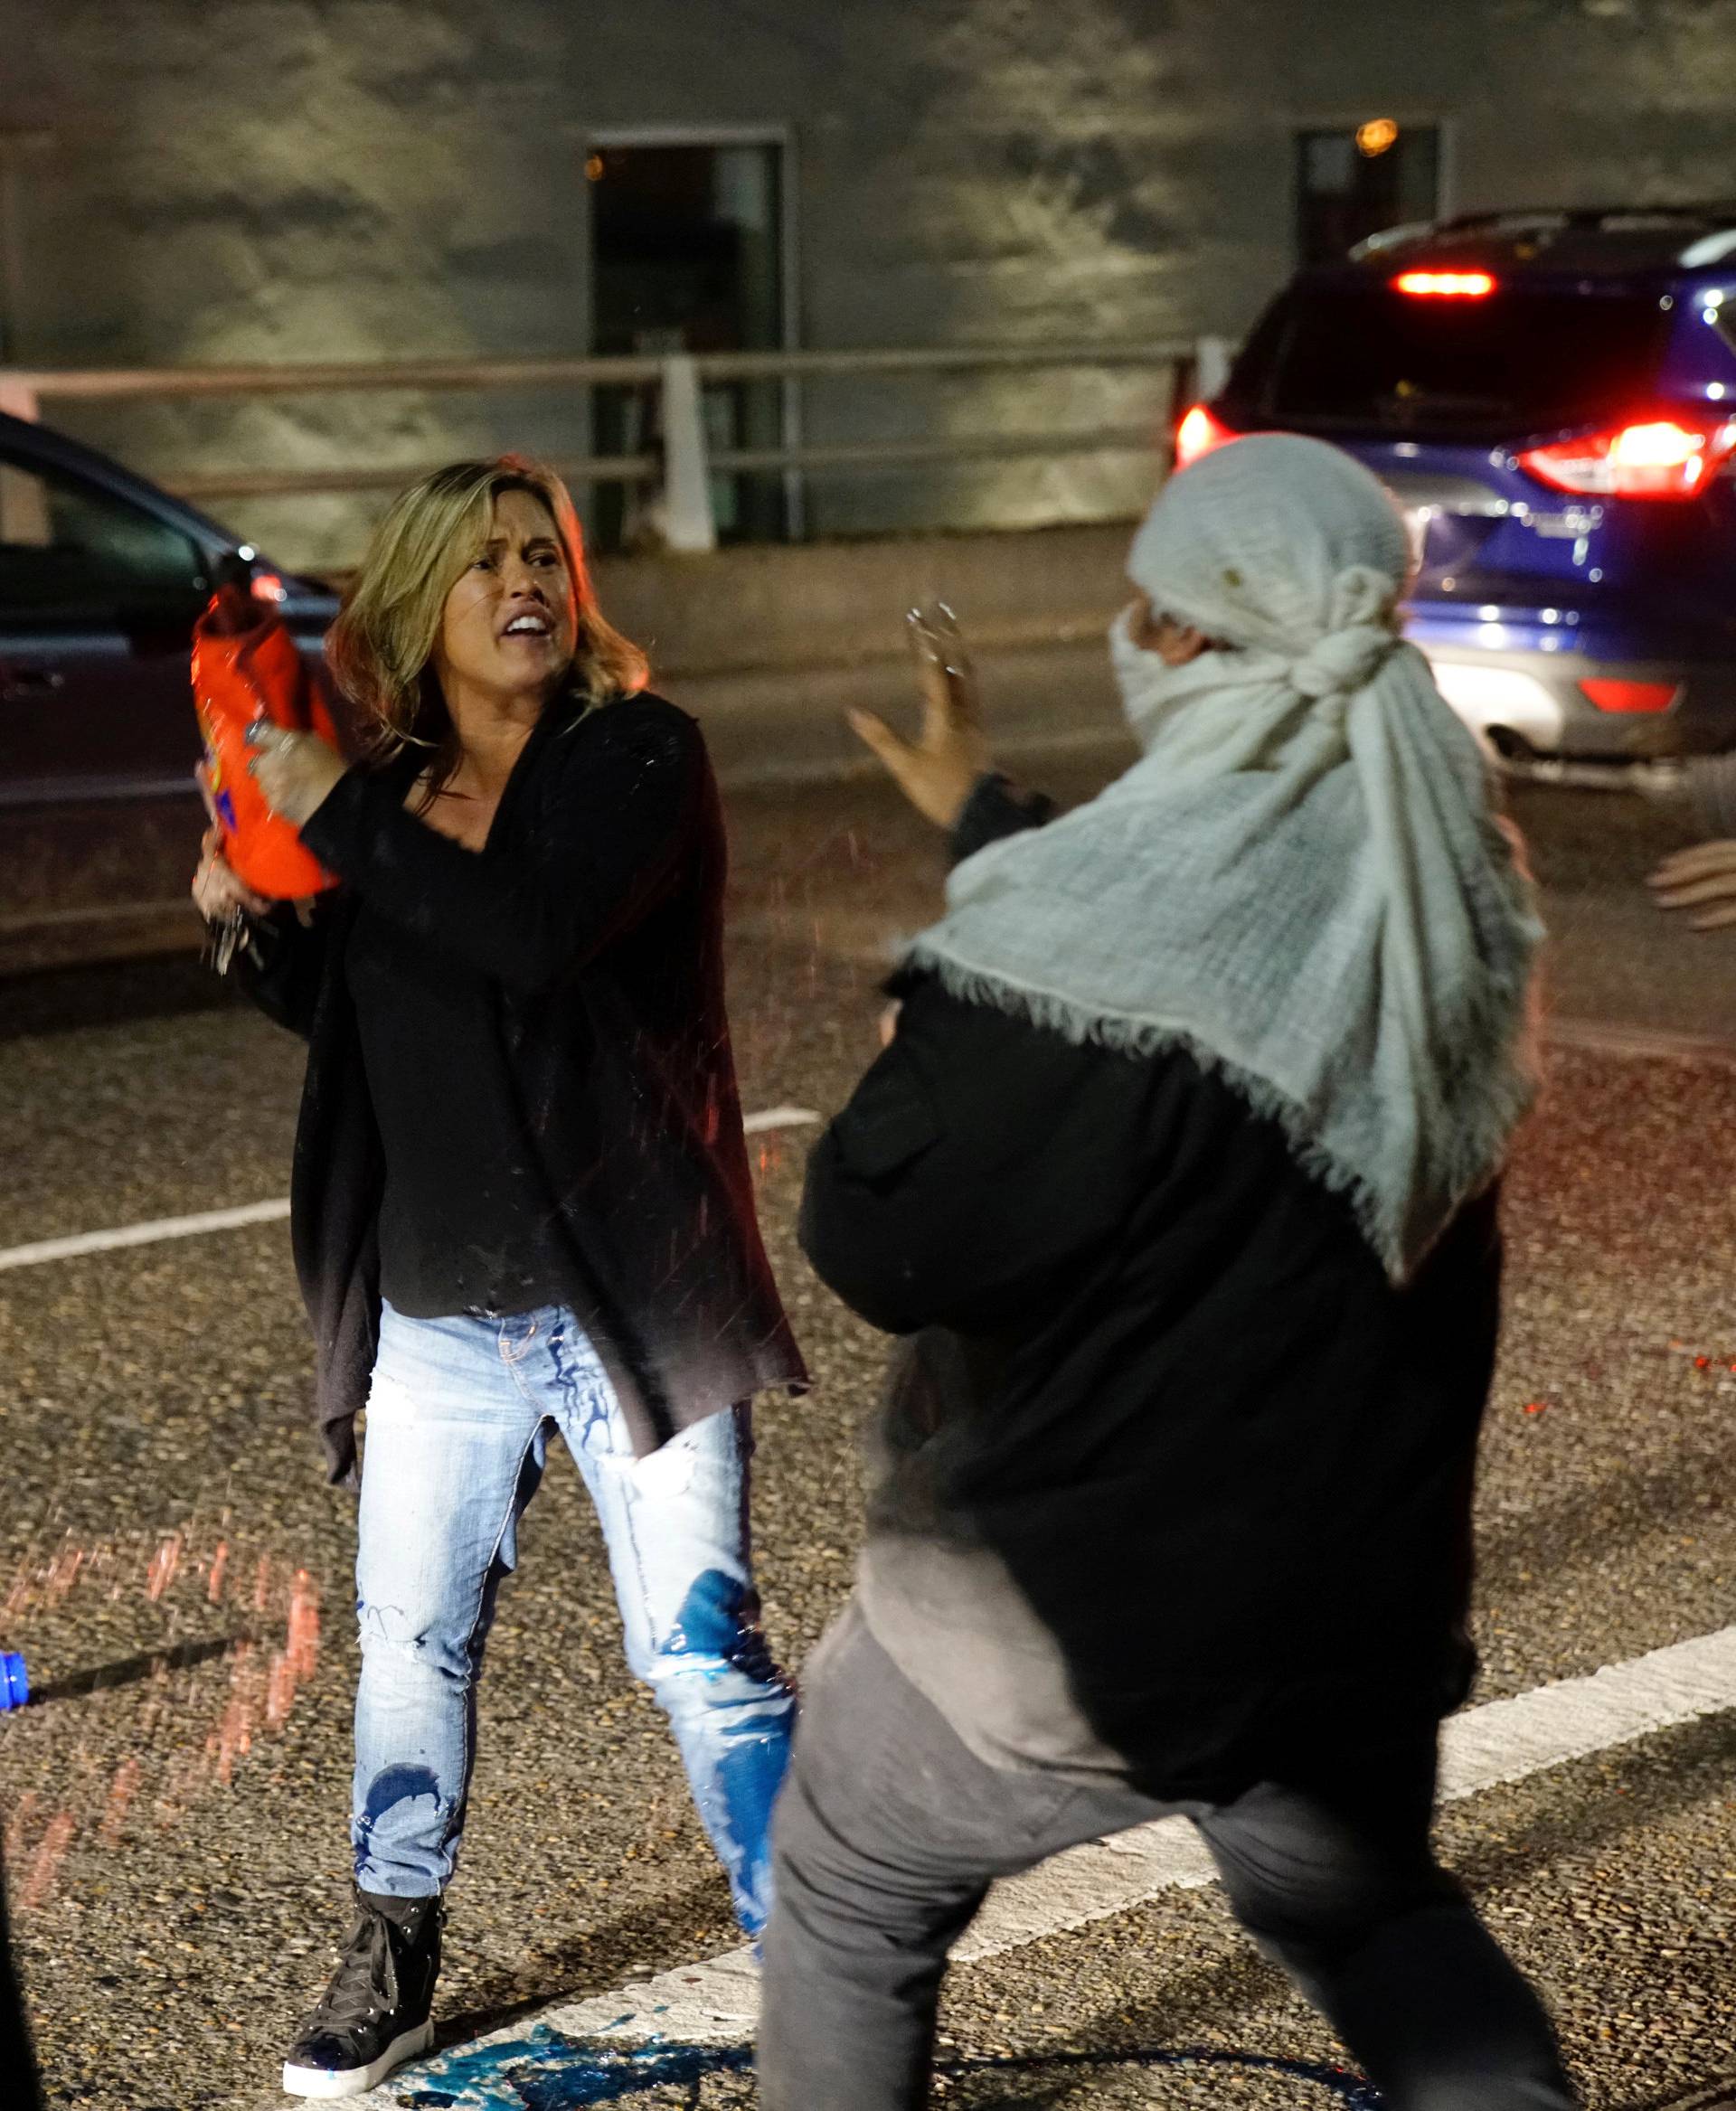 A motorist who was caught in the middle of a riot threatens a demonstrator with detergent during a protest against the election of Republican Donald Trump as President of the United States in Portland